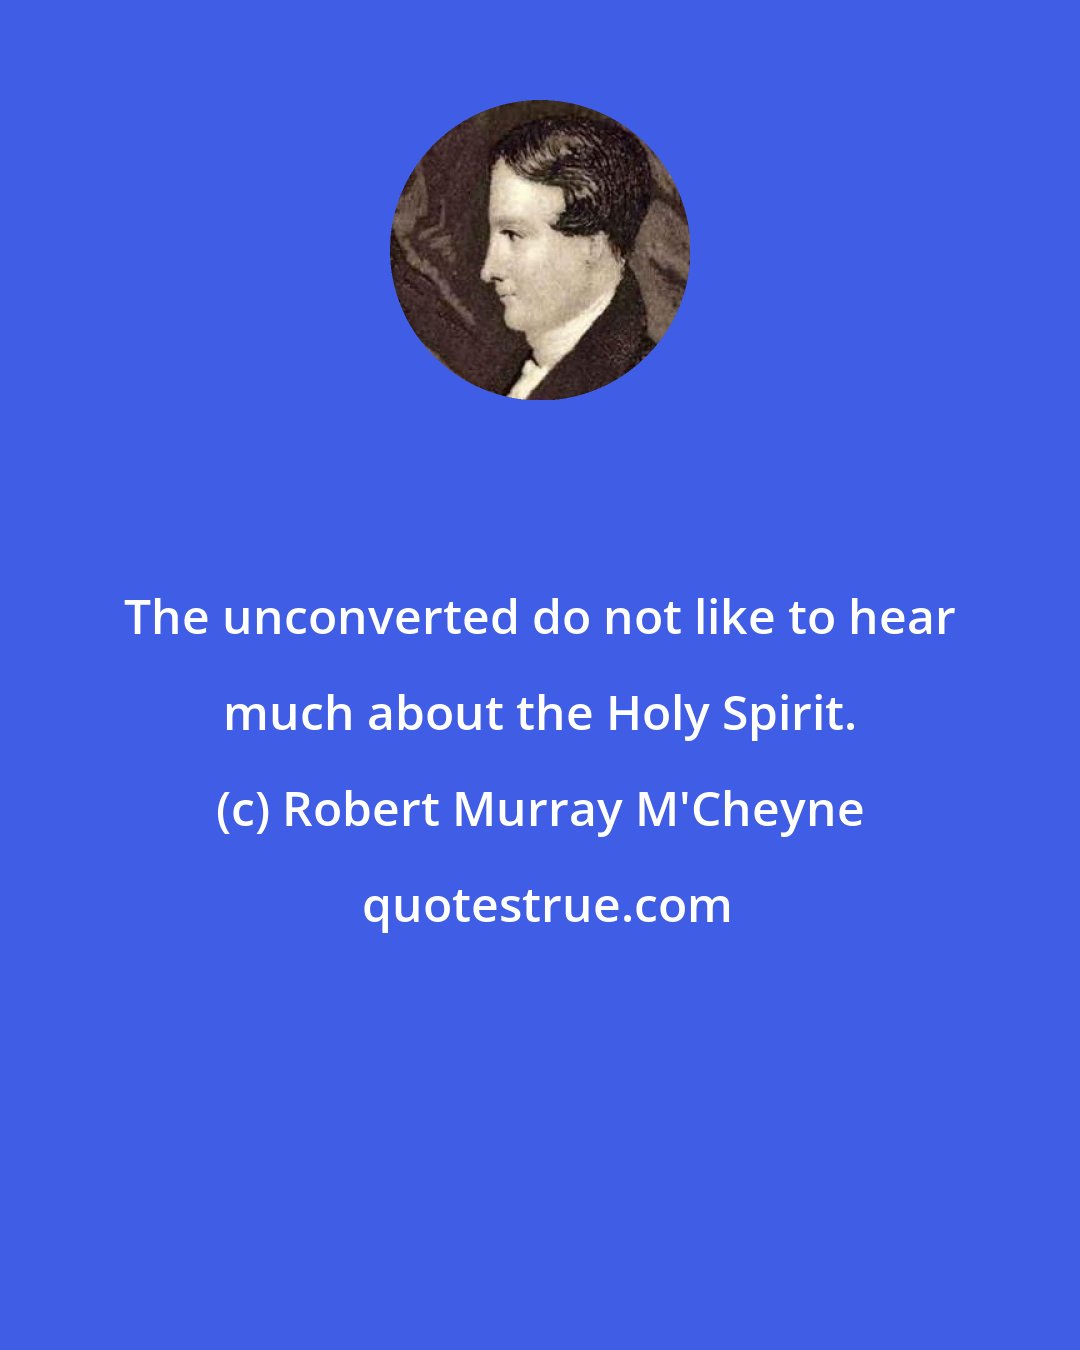 Robert Murray M'Cheyne: The unconverted do not like to hear much about the Holy Spirit.